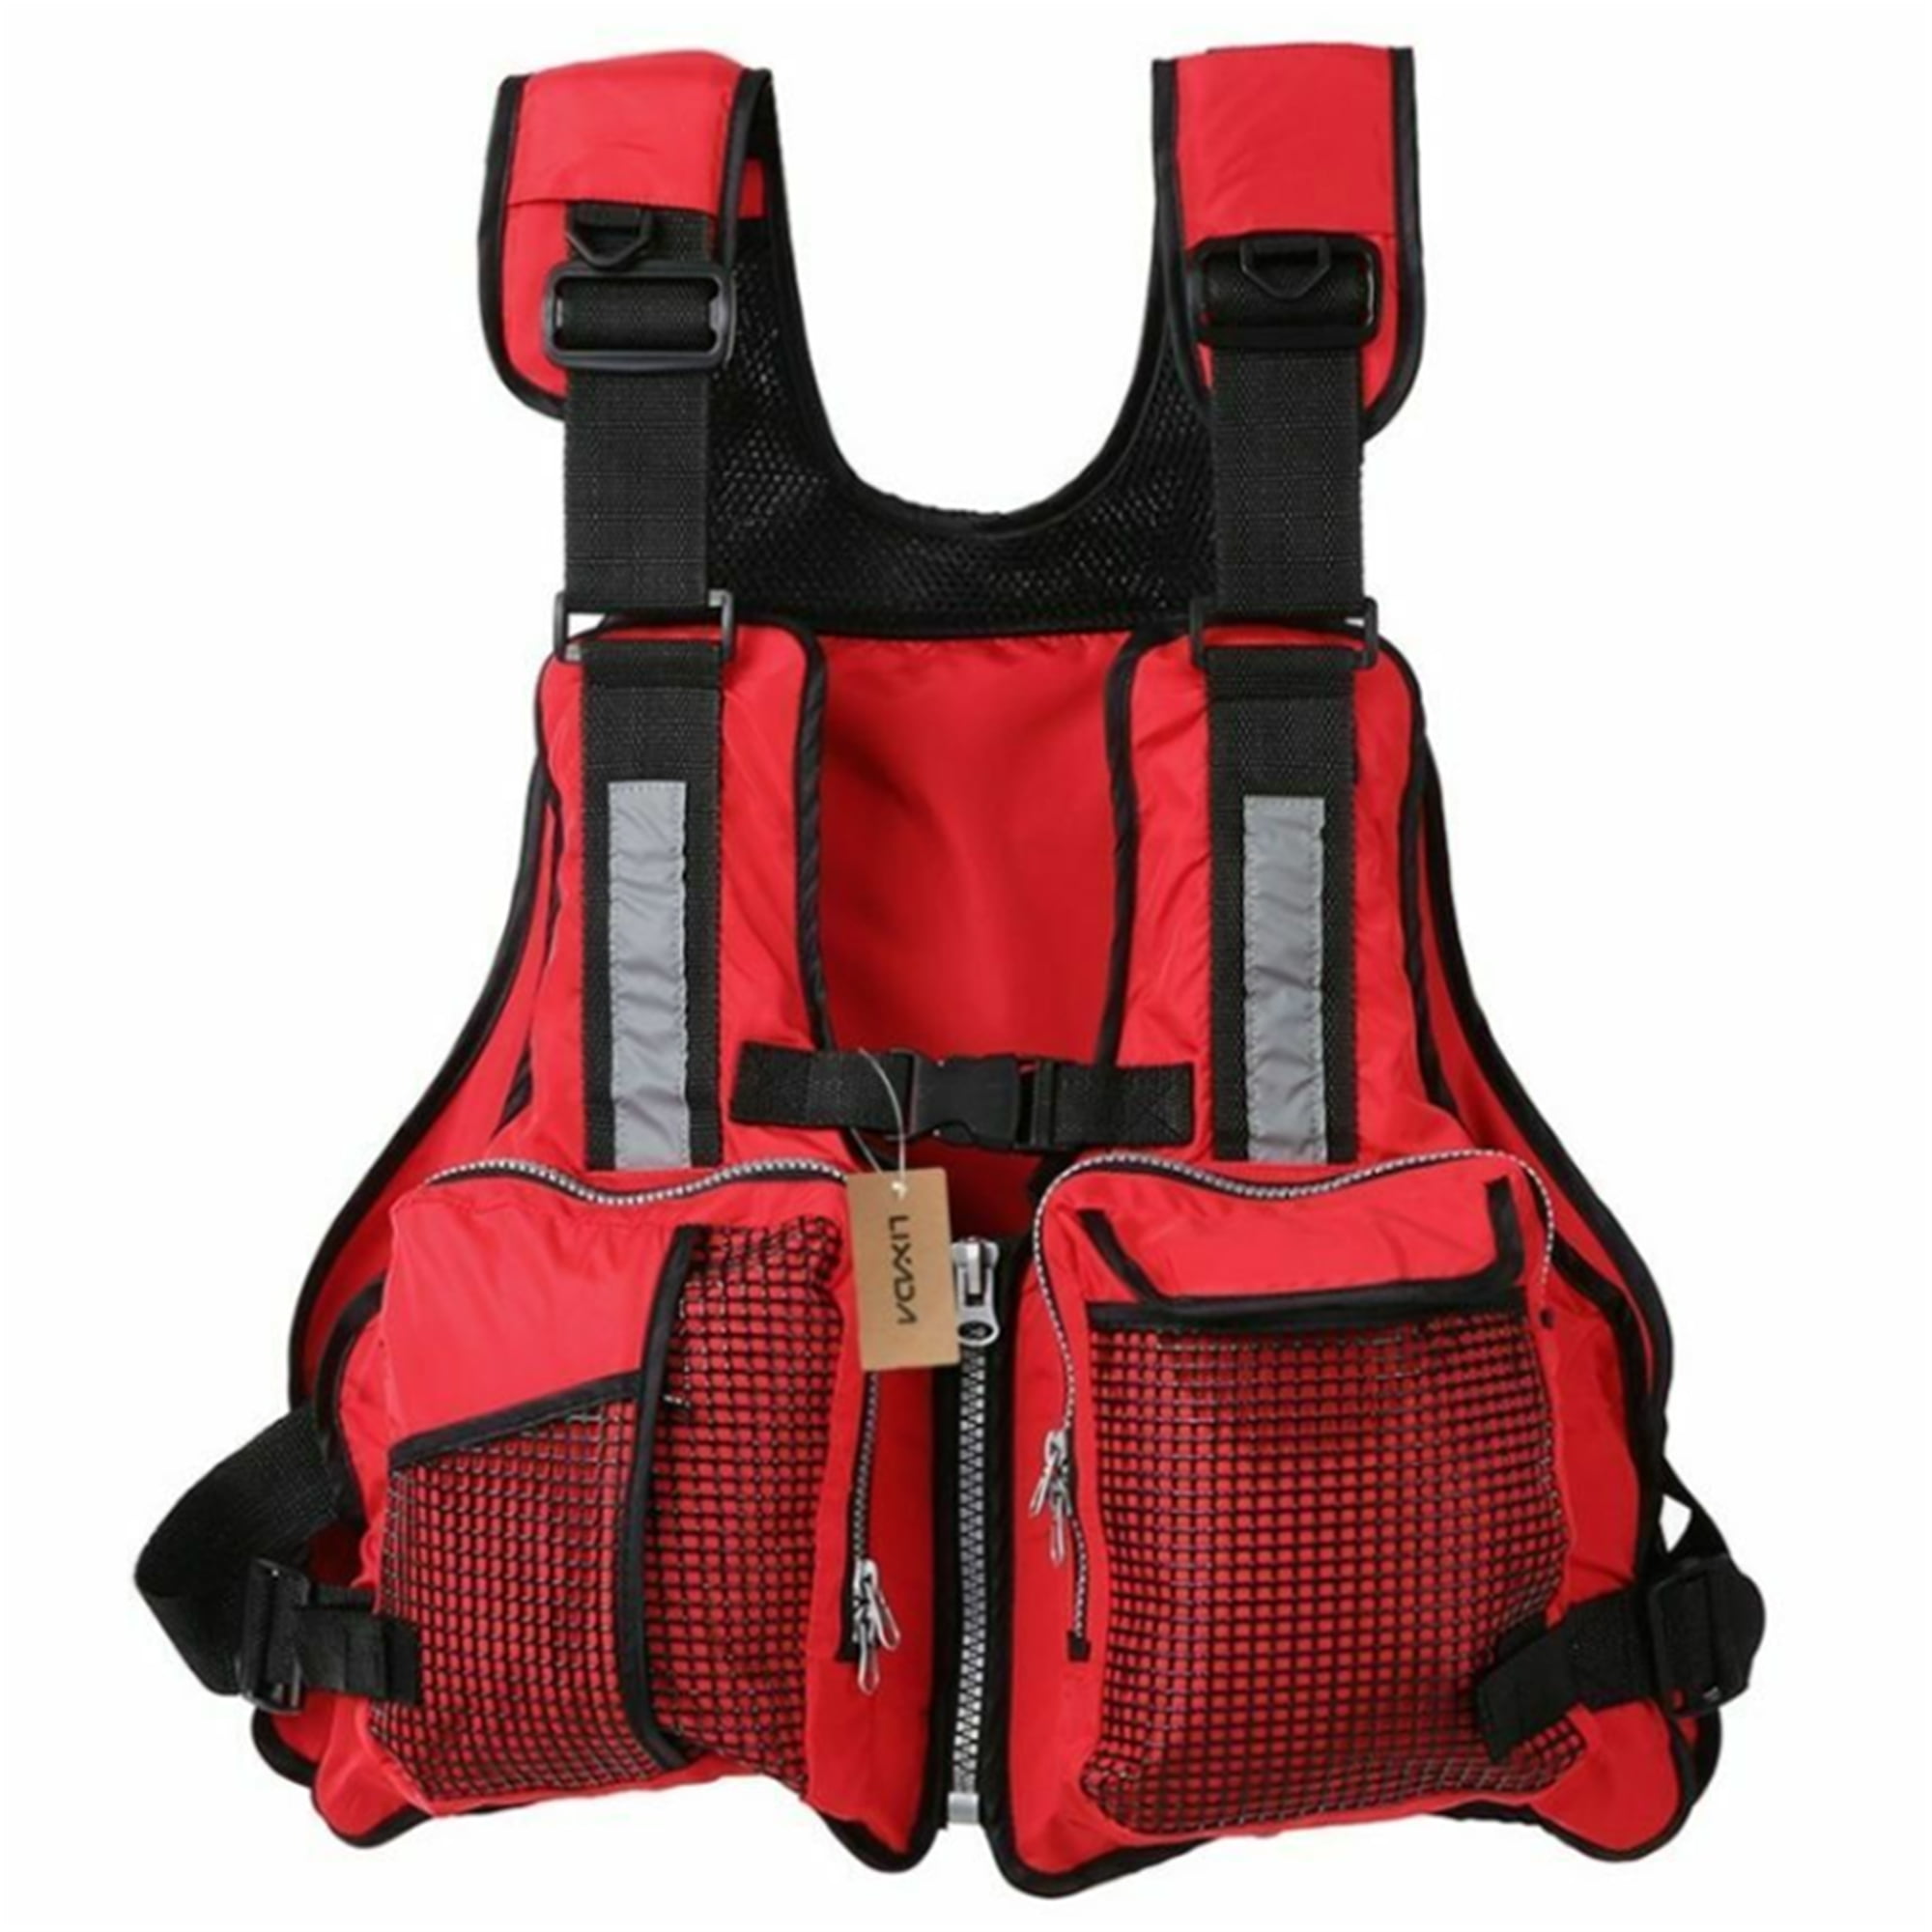 A+ Quality M-33 Manual Inflatable Life Jacket Lifevest PFD Reflective Bouyancy 